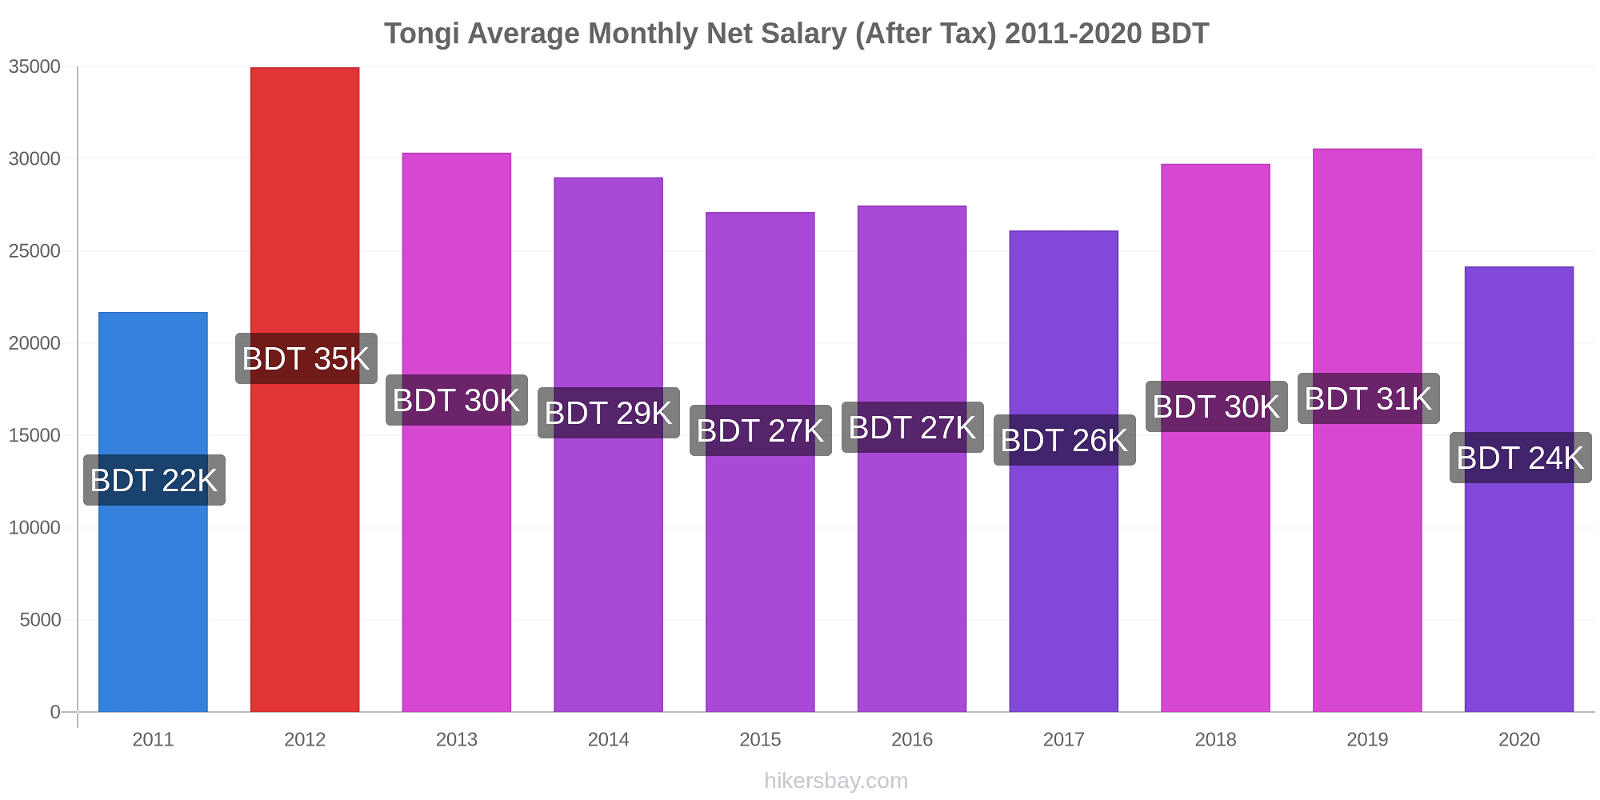 Tongi price changes Average Monthly Net Salary (After Tax) hikersbay.com